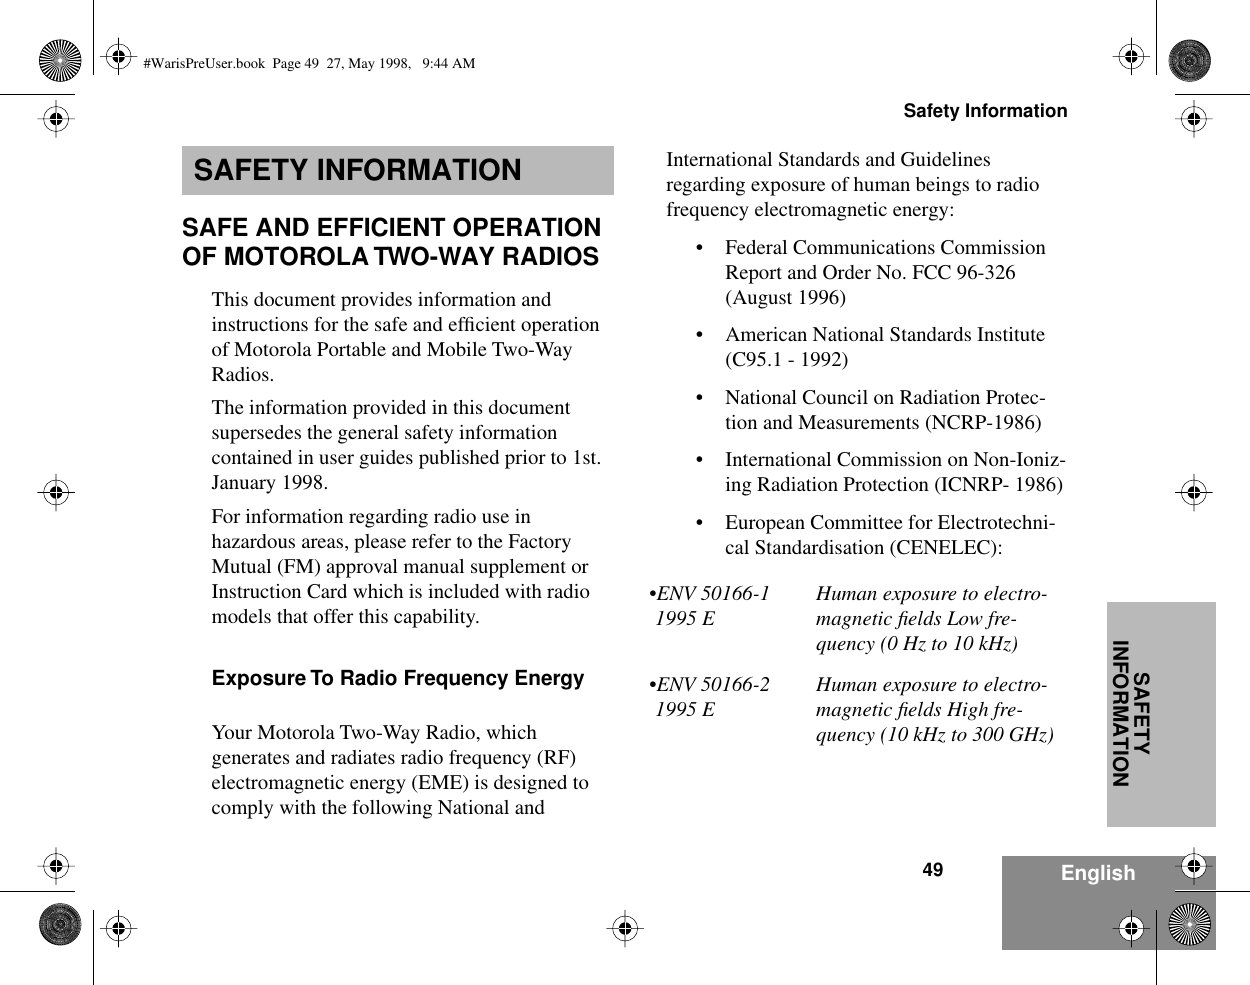 49Safety InformationEnglishSAFETY INFORMATIONSAFETY INFORMATIONSAFE AND EFFICIENT OPERATION OF MOTOROLA TWO-WAY RADIOSThis document provides information and instructions for the safe and efﬁcient operation of Motorola Portable and Mobile Two-Way Radios.The information provided in this document supersedes the general safety information contained in user guides published prior to 1st. January 1998. For information regarding radio use in hazardous areas, please refer to the Factory Mutual (FM) approval manual supplement or Instruction Card which is included with radio models that offer this capability.Exposure To Radio Frequency EnergyYour Motorola Two-Way Radio, which generates and radiates radio frequency (RF) electromagnetic energy (EME) is designed to comply with the following National and International Standards and Guidelines regarding exposure of human beings to radio frequency electromagnetic energy:• Federal Communications Commission Report and Order No. FCC 96-326 (August 1996)• American National Standards Institute (C95.1 - 1992)• National Council on Radiation Protec-tion and Measurements (NCRP-1986)• International Commission on Non-Ioniz-ing Radiation Protection (ICNRP- 1986)• European Committee for Electrotechni-cal Standardisation (CENELEC):•ENV 50166-1 1995 EHuman exposure to electro-magnetic ﬁelds Low fre-quency (0 Hz to 10 kHz) •ENV 50166-2 1995 EHuman exposure to electro-magnetic ﬁelds High fre-quency (10 kHz to 300 GHz)#WarisPreUser.book  Page 49  27, May 1998,   9:44 AM